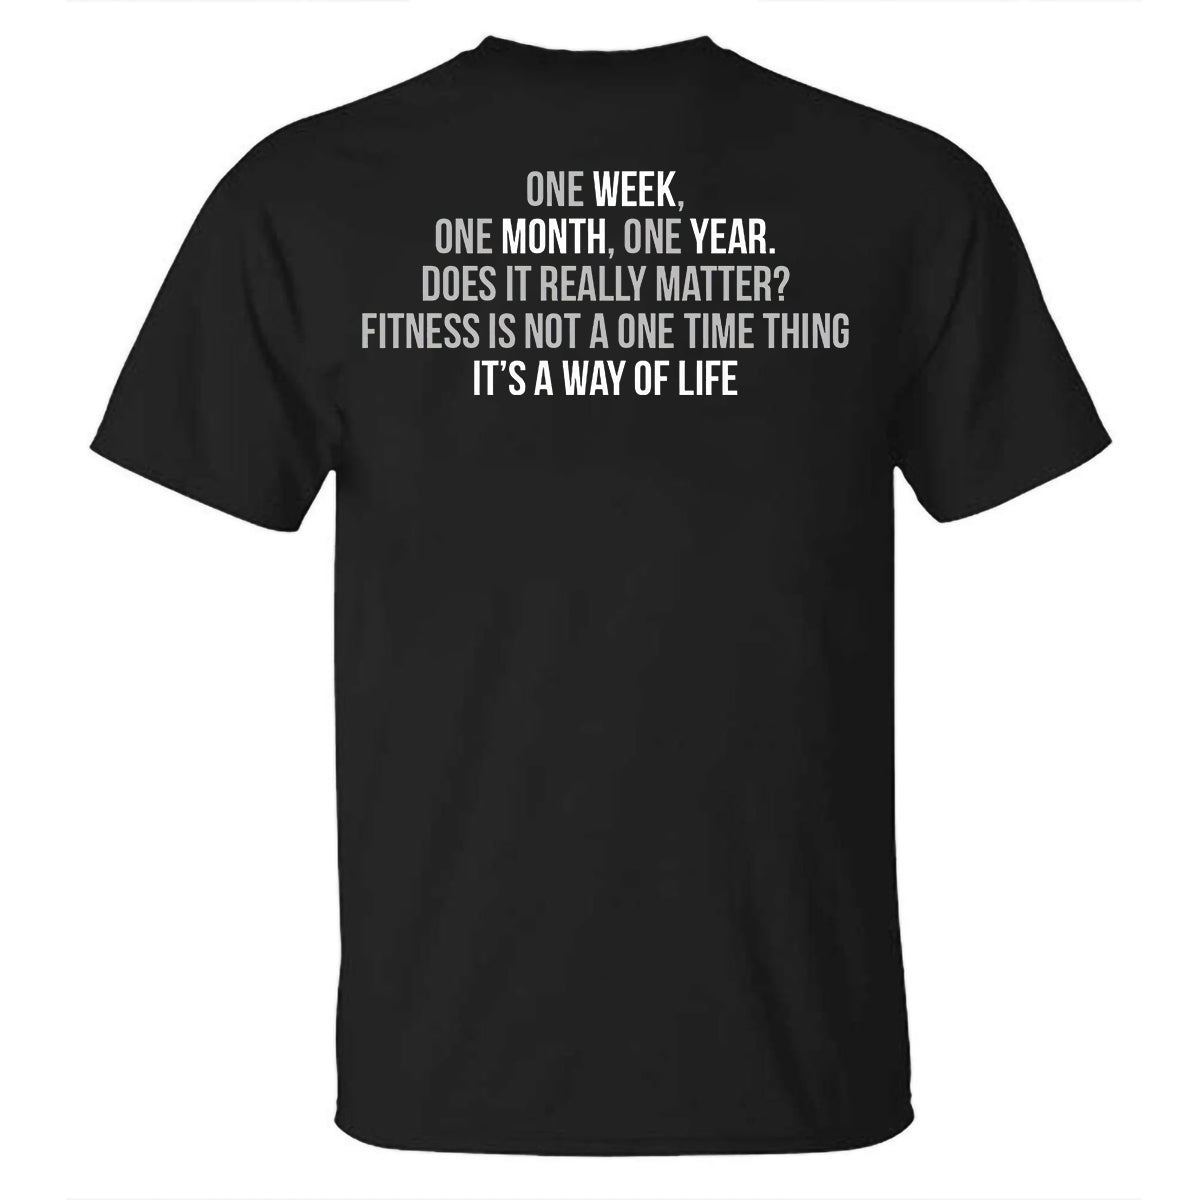 Fitness Is Not A One Time Thing It's A Way Of Life Printed T-shirt